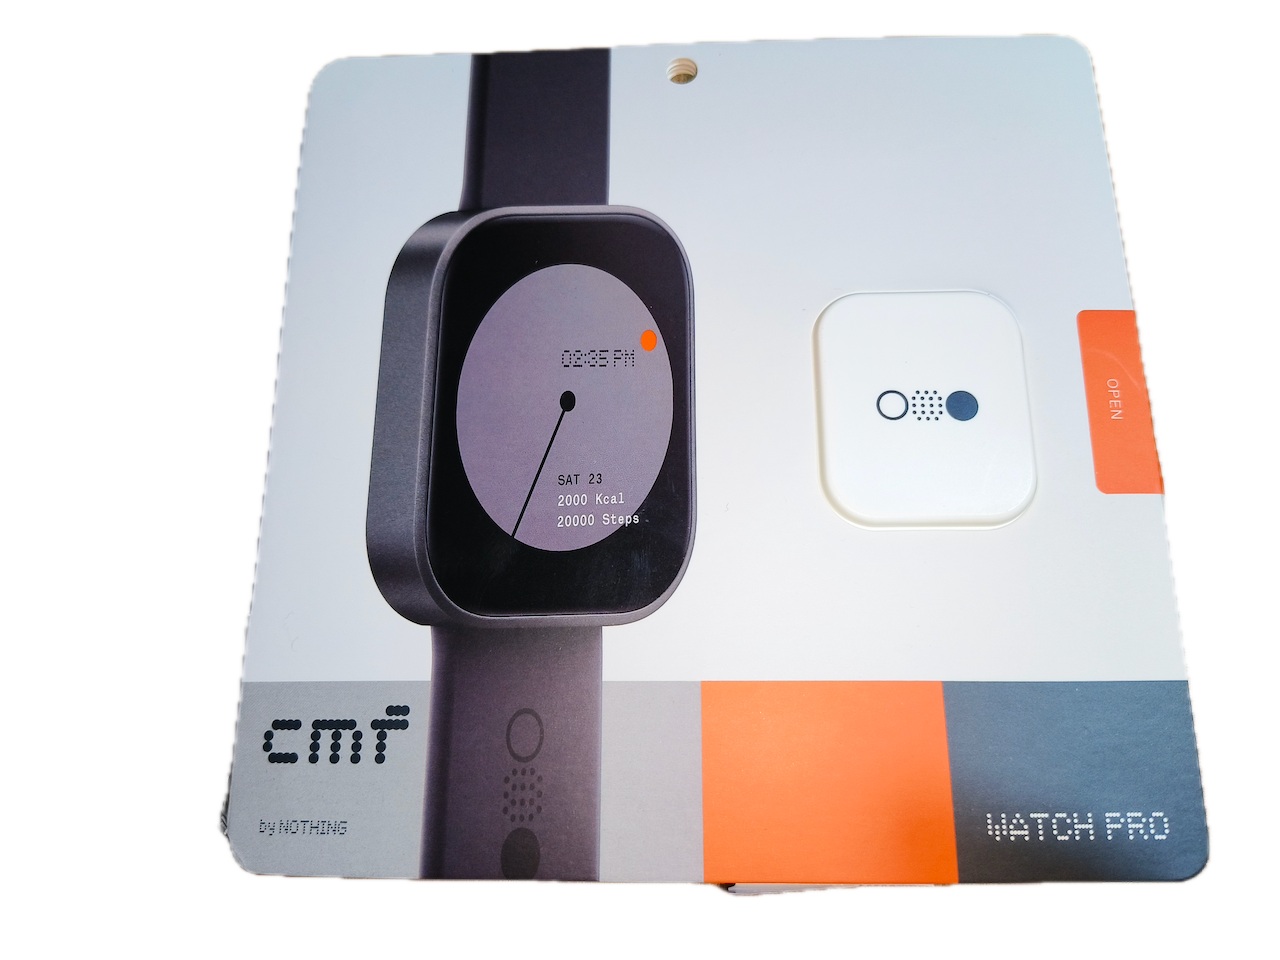 Global Version CMF by Nothing Watch Pro 1.96 AMOLED Bluetooth 5.3 BT Calls  with AI Noise Reduction GPS Smartwatch CMF watch Pro